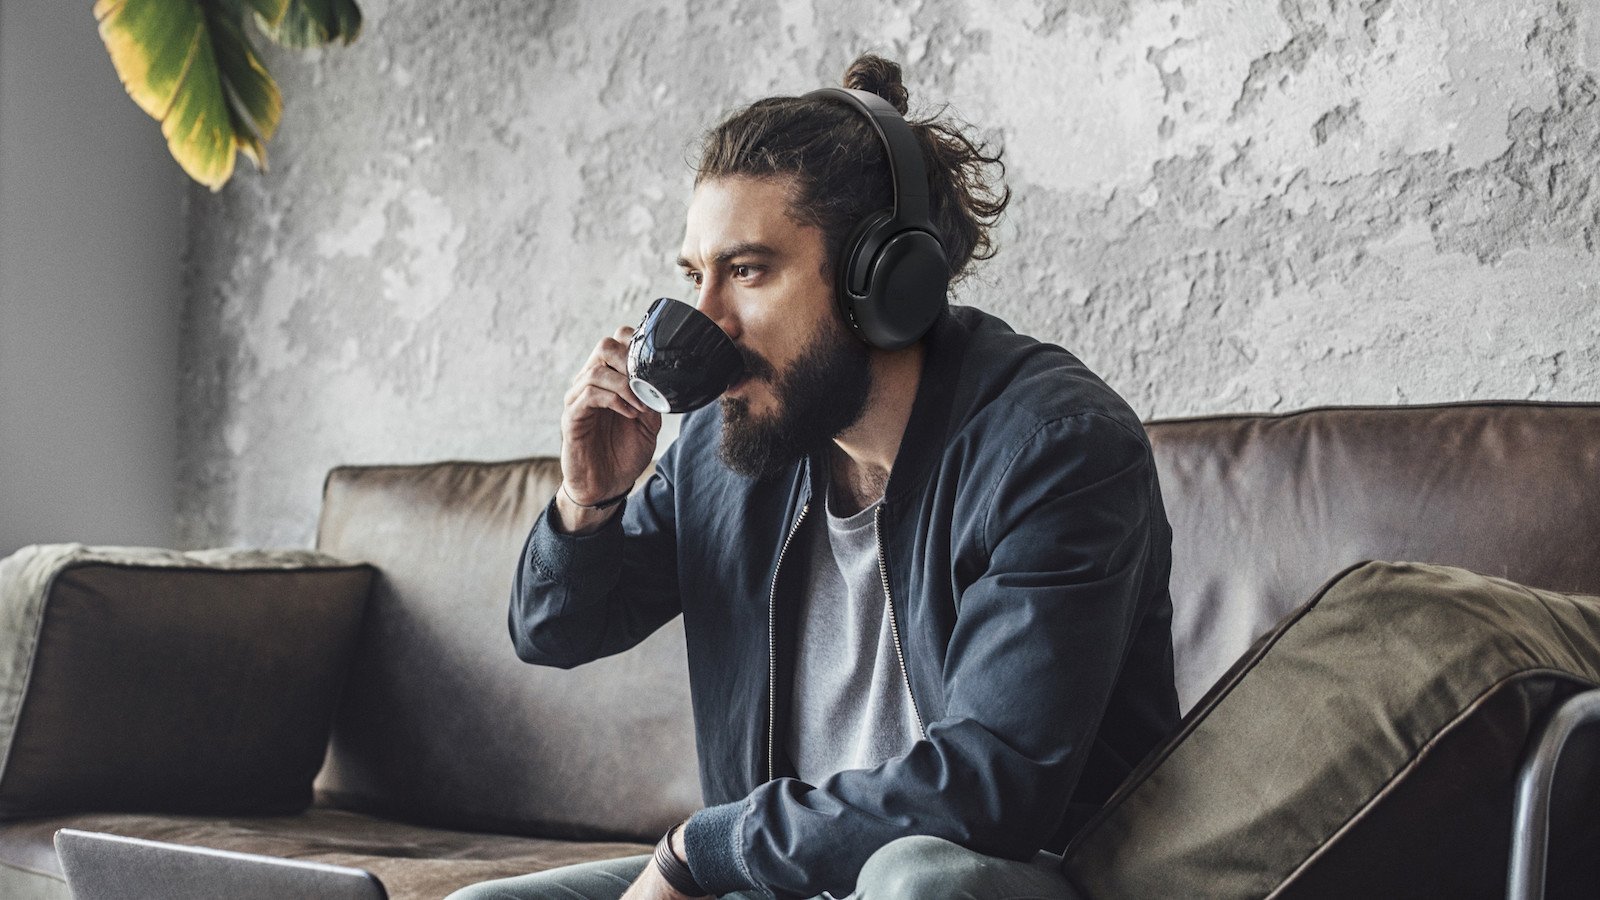 JBL Tour ONE M2 headphones combine the best of True Adaptive ANC with pro-tuned drivers